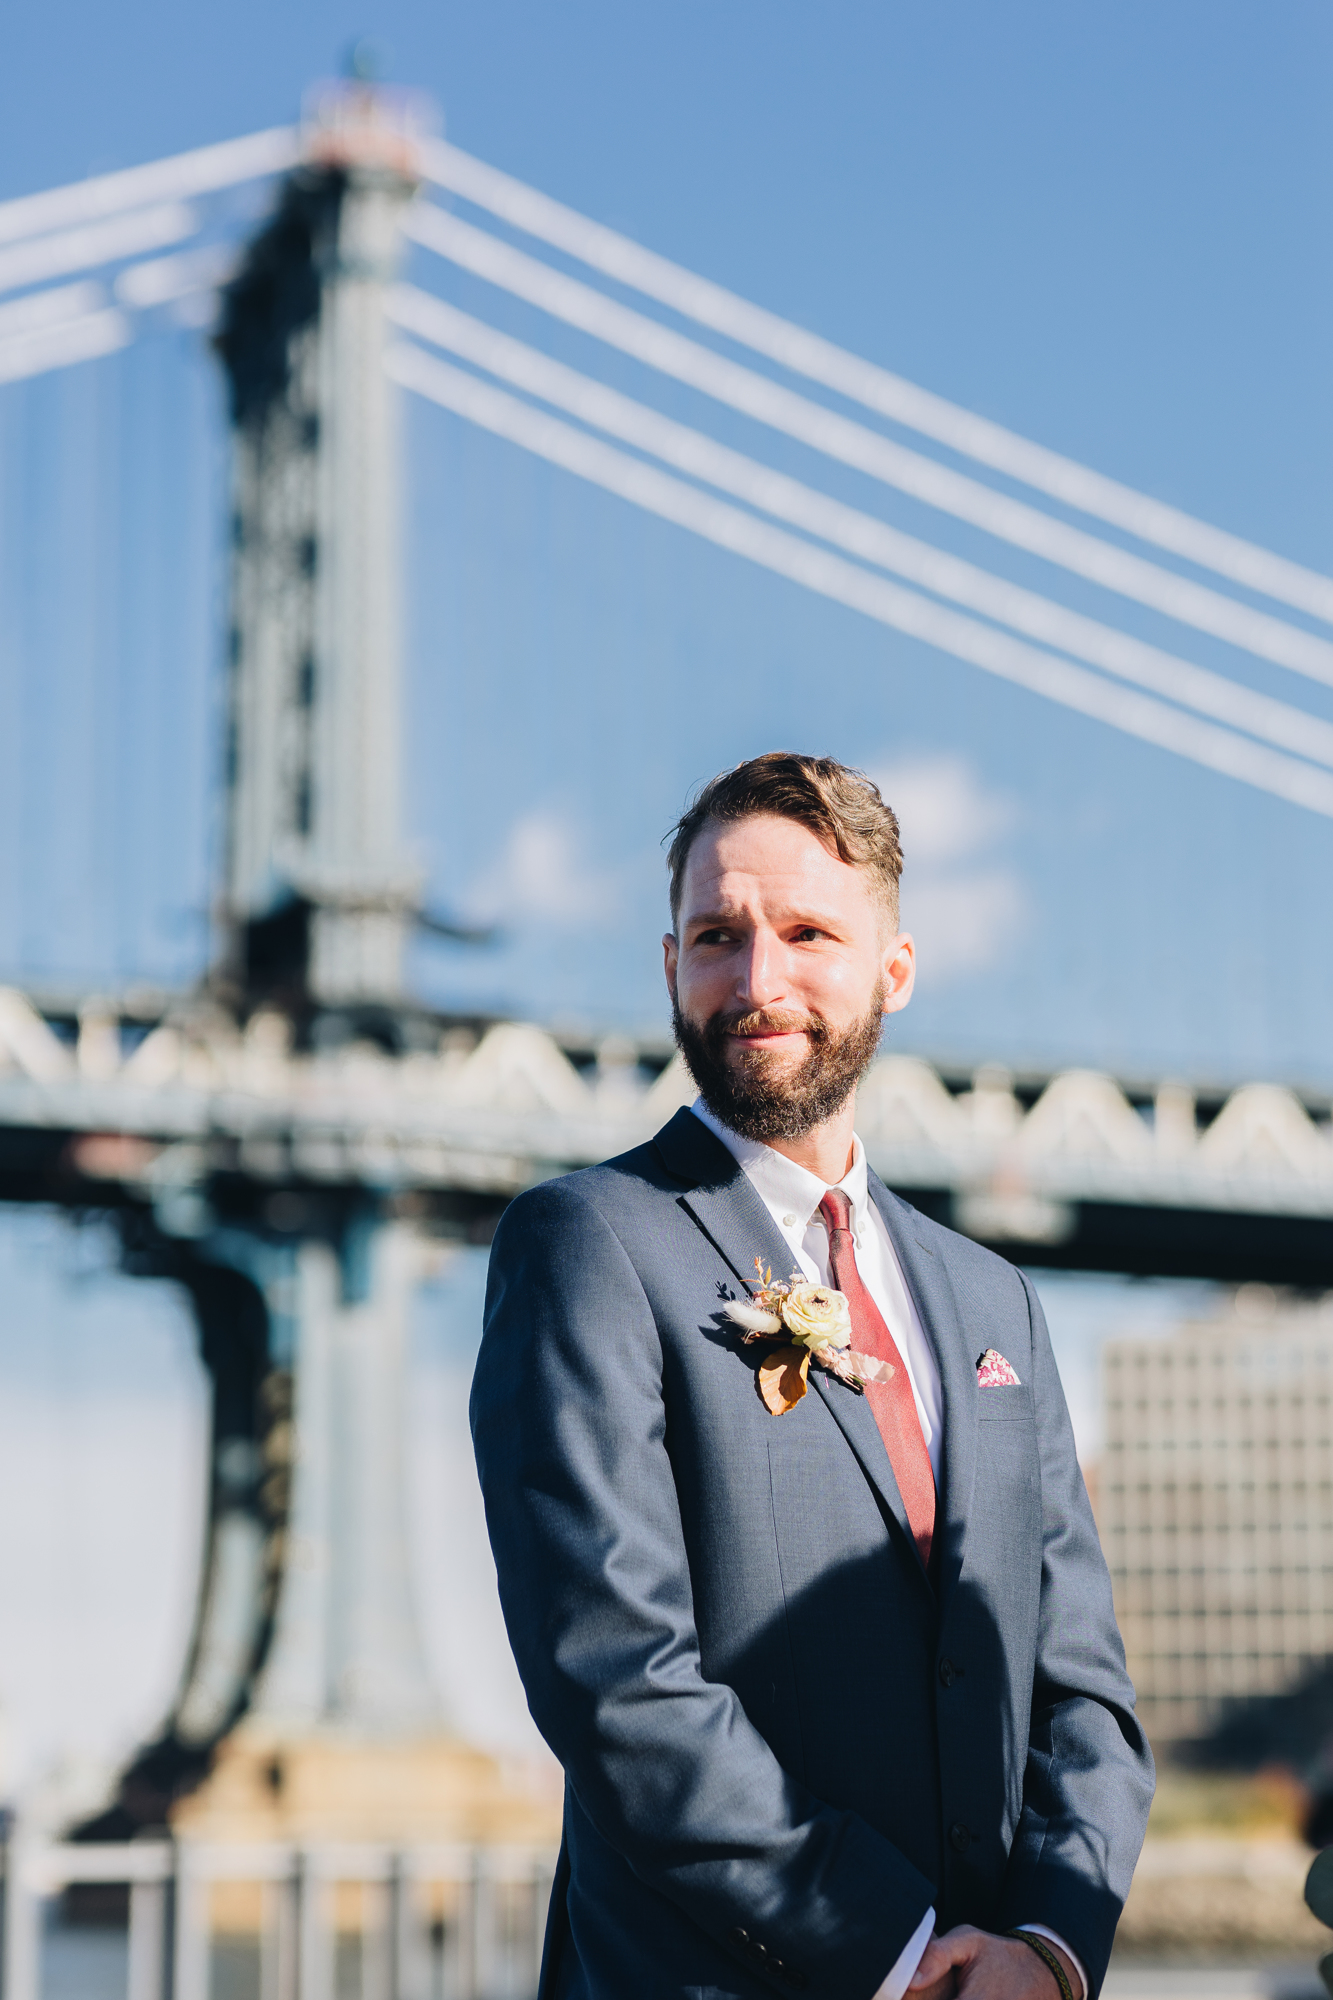 Romantic Fall DUMBO Elopement with New York views and foliage